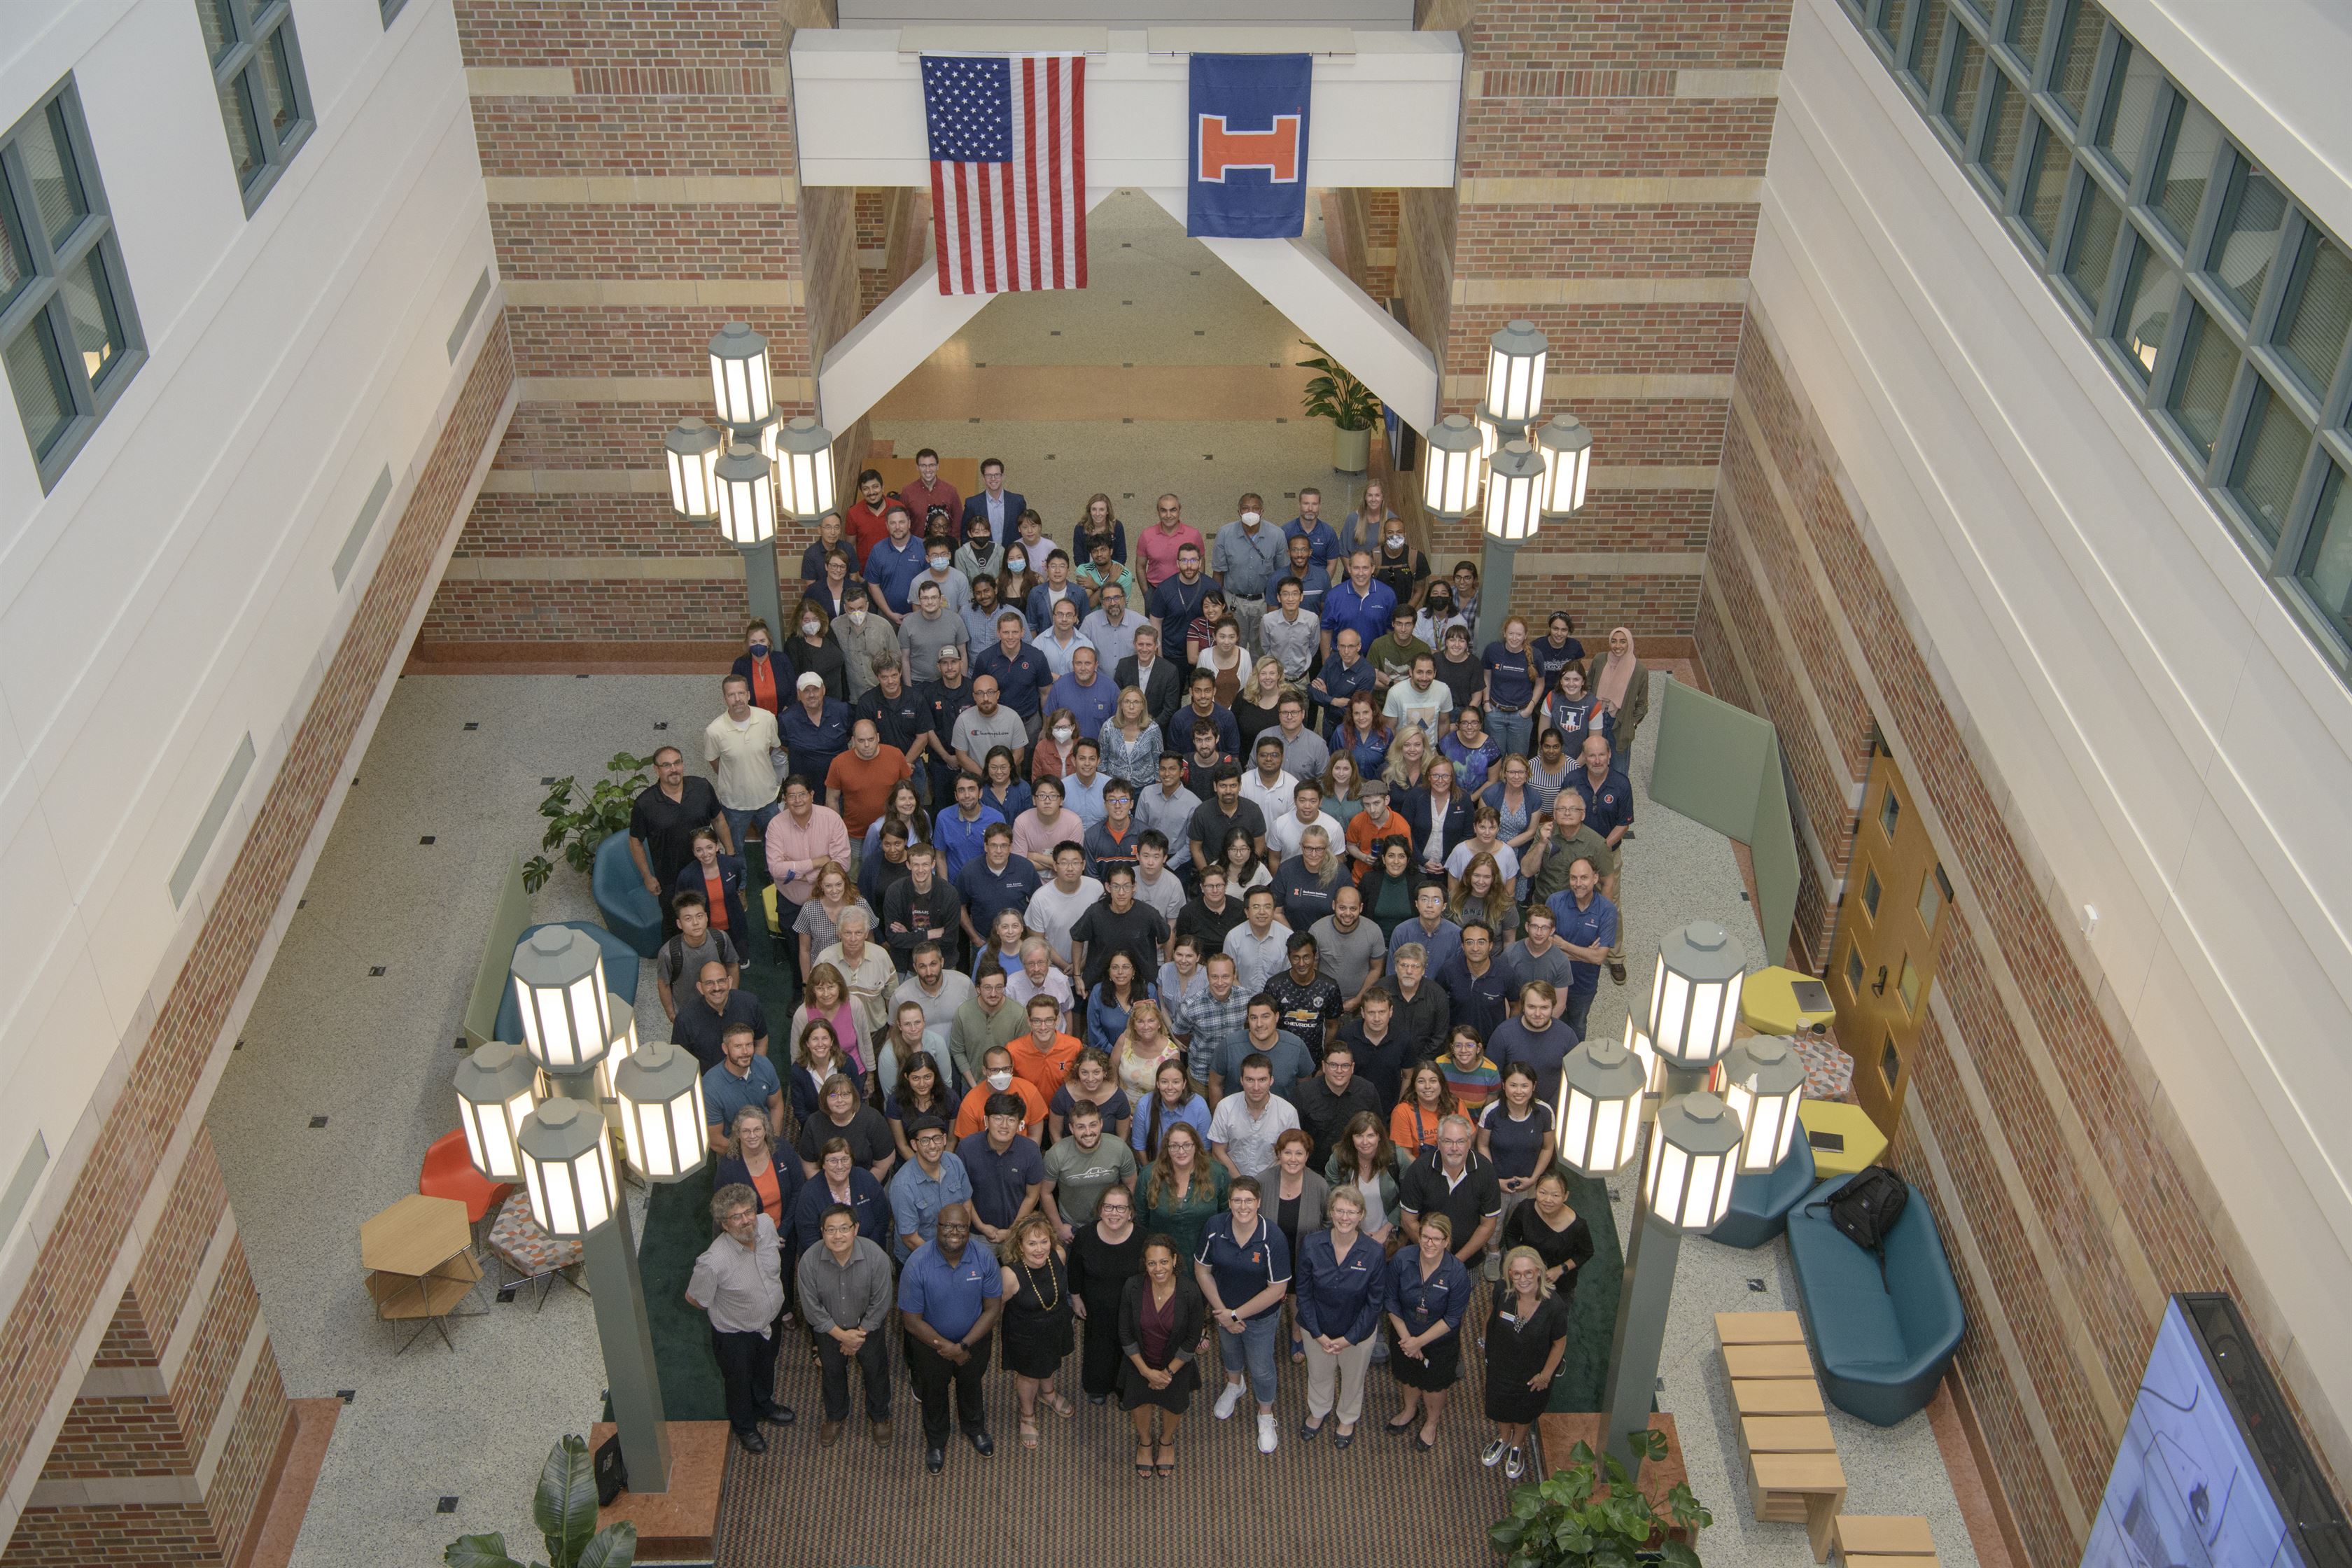 A view of Beckman staff members standing in the atrium, as taken from a bridge, at the Beckman Institute at the University of Illinois at Urbana-Champaign (UIUC)